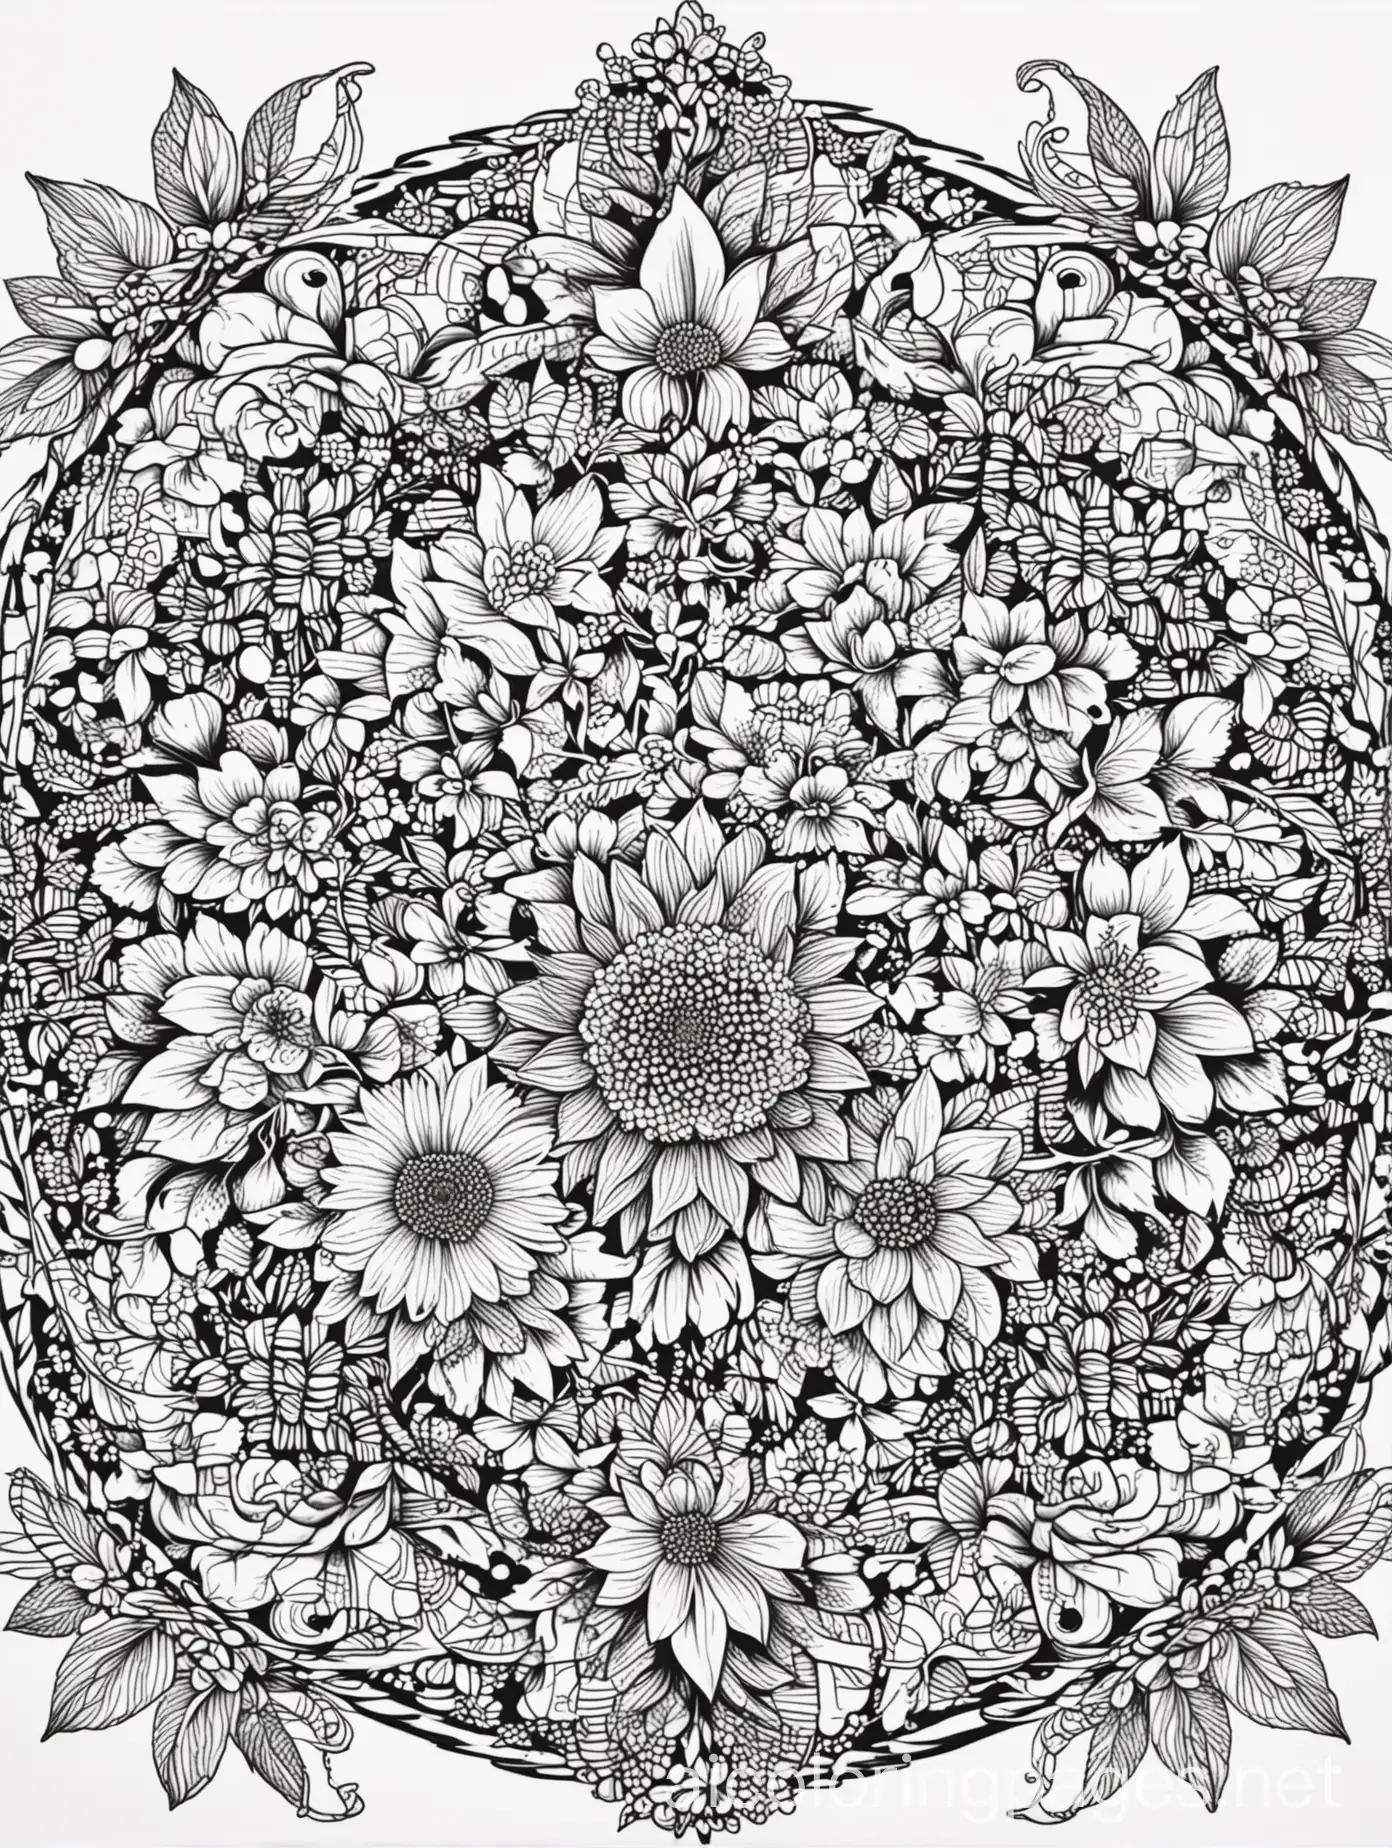 a lush. floral mandala with a mi of large  and small flowers , leaves, and vines, this design encourages a sense of growth and natural beauty
, Coloring Page, black and white, line art, white background, Simplicity, Ample White Space. The background of the coloring page is plain white to make it easy for young children to color within the lines. The outlines of all the subjects are easy to distinguish, making it simple for kids to color without too much difficulty